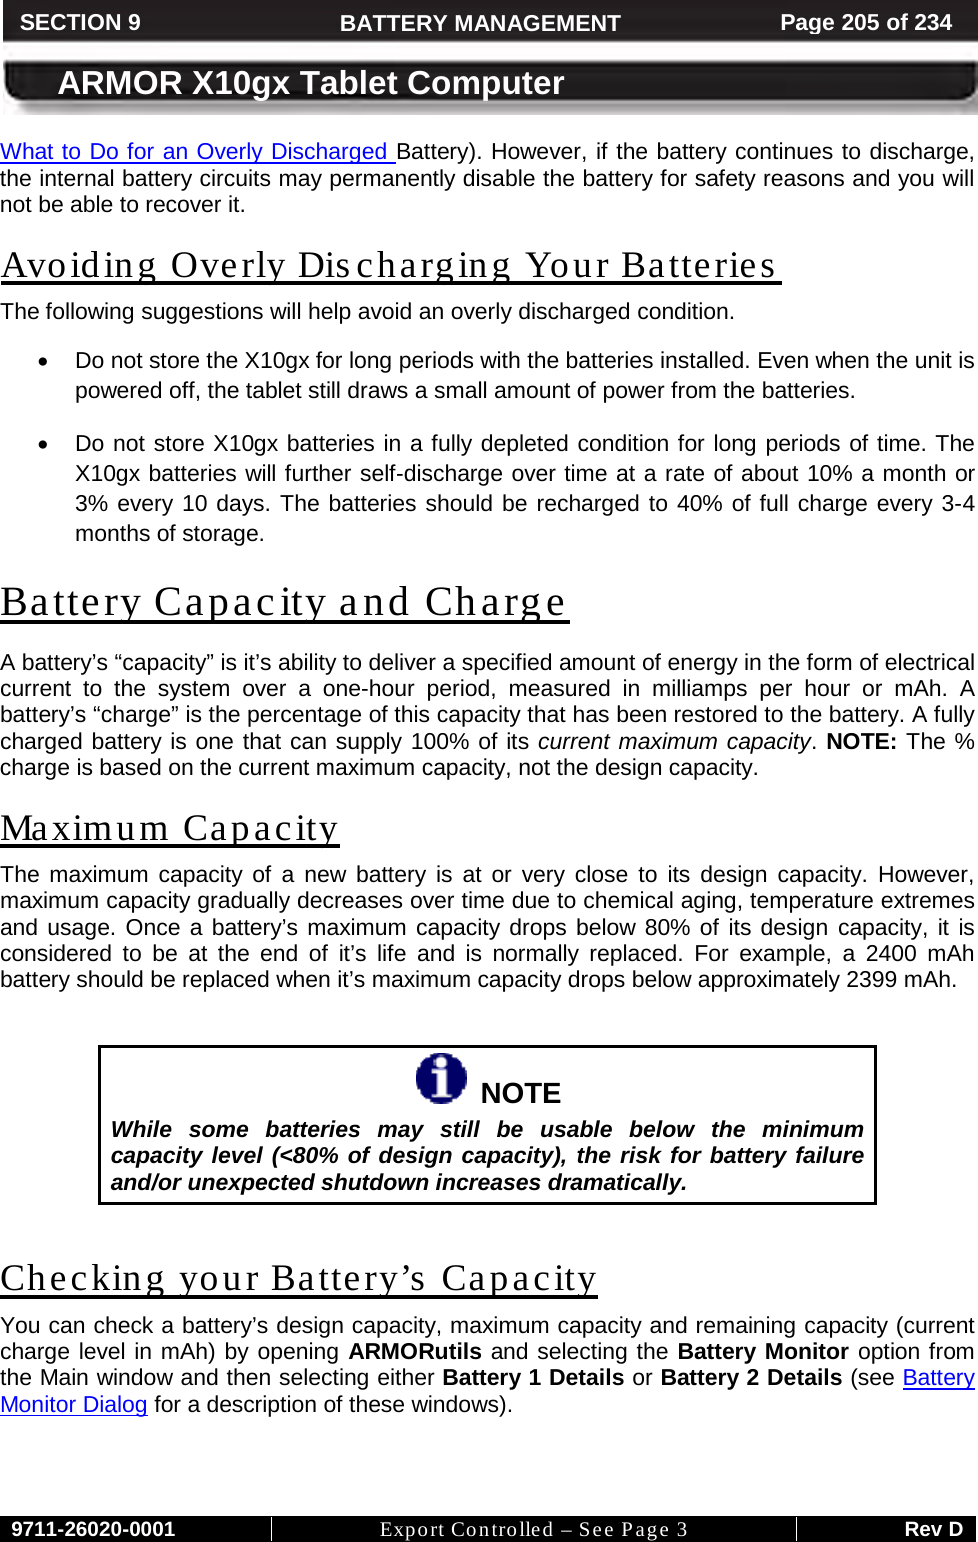     9711-26020-0001 Export Controlled – See Page 3 Rev D SECTION 8 ARMOR X10gx Tablet Computer SECTION 9 BATTERY MANAGEMENT Page 205 of 234  ARMOR X10gx Tablet Computer What to Do for an Overly Discharged Battery). However, if the battery continues to discharge, the internal battery circuits may permanently disable the battery for safety reasons and you will not be able to recover it. Avoiding Overly Discharging Your Batteries The following suggestions will help avoid an overly discharged condition. • Do not store the X10gx for long periods with the batteries installed. Even when the unit is powered off, the tablet still draws a small amount of power from the batteries. • Do not store X10gx batteries in a fully depleted condition for long periods of time. The X10gx batteries will further self-discharge over time at a rate of about 10% a month or 3% every 10 days. The batteries should be recharged to 40% of full charge every 3-4 months of storage. Battery Capacity and Charge A battery’s “capacity” is it’s ability to deliver a specified amount of energy in the form of electrical current to the system over a one-hour period, measured in milliamps per hour or mAh. A battery’s “charge” is the percentage of this capacity that has been restored to the battery. A fully charged battery is one that can supply 100% of its current maximum capacity. NOTE: The % charge is based on the current maximum capacity, not the design capacity. Maximum Capacity The maximum capacity of a new battery is at or very close to its design capacity. However, maximum capacity gradually decreases over time due to chemical aging, temperature extremes and usage. Once a battery’s maximum capacity drops below 80% of its design capacity, it is considered to be at the end of it’s life and is normally replaced. For example, a 2400 mAh battery should be replaced when it’s maximum capacity drops below approximately 2399 mAh.     NOTE While some batteries may still be usable below the minimum capacity level (&lt;80% of design capacity), the risk for battery failure and/or unexpected shutdown increases dramatically.  Checking your Battery’s Capacity You can check a battery’s design capacity, maximum capacity and remaining capacity (current charge level in mAh) by opening ARMORutils and selecting the Battery Monitor option from the Main window and then selecting either Battery 1 Details or Battery 2 Details (see Battery Monitor Dialog for a description of these windows).  